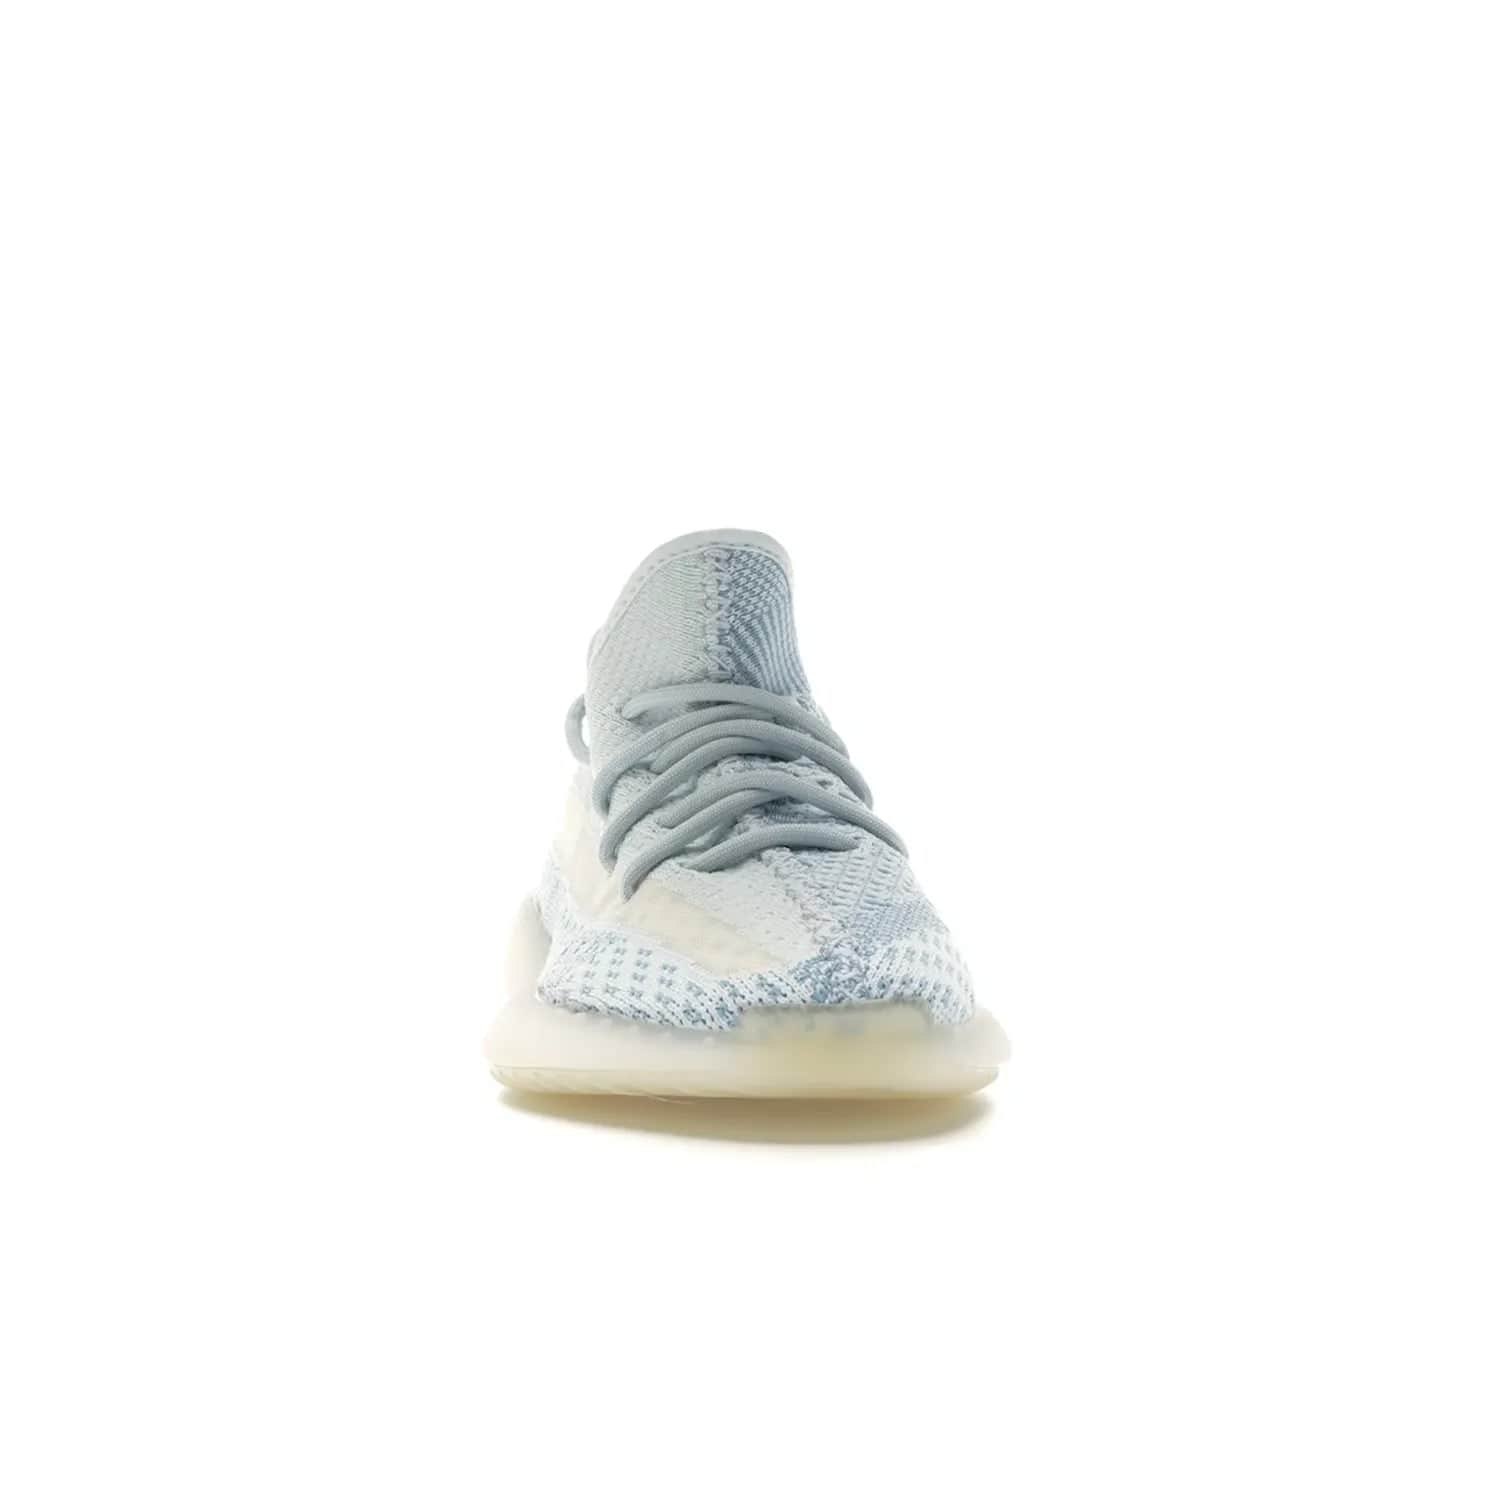 adidas Yeezy Boost 350 V2 Cloud White (Non-Reflective) - Image 9 - Only at www.BallersClubKickz.com - Uniquely designed adidas Yeezy Boost 350 V2 Cloud White (Non-Reflective) with a Primeknit upper in shades of cream and blue with a contrasting hard sole. A fashion-forward sneaker with a transparent strip and blue-and-white patterns.